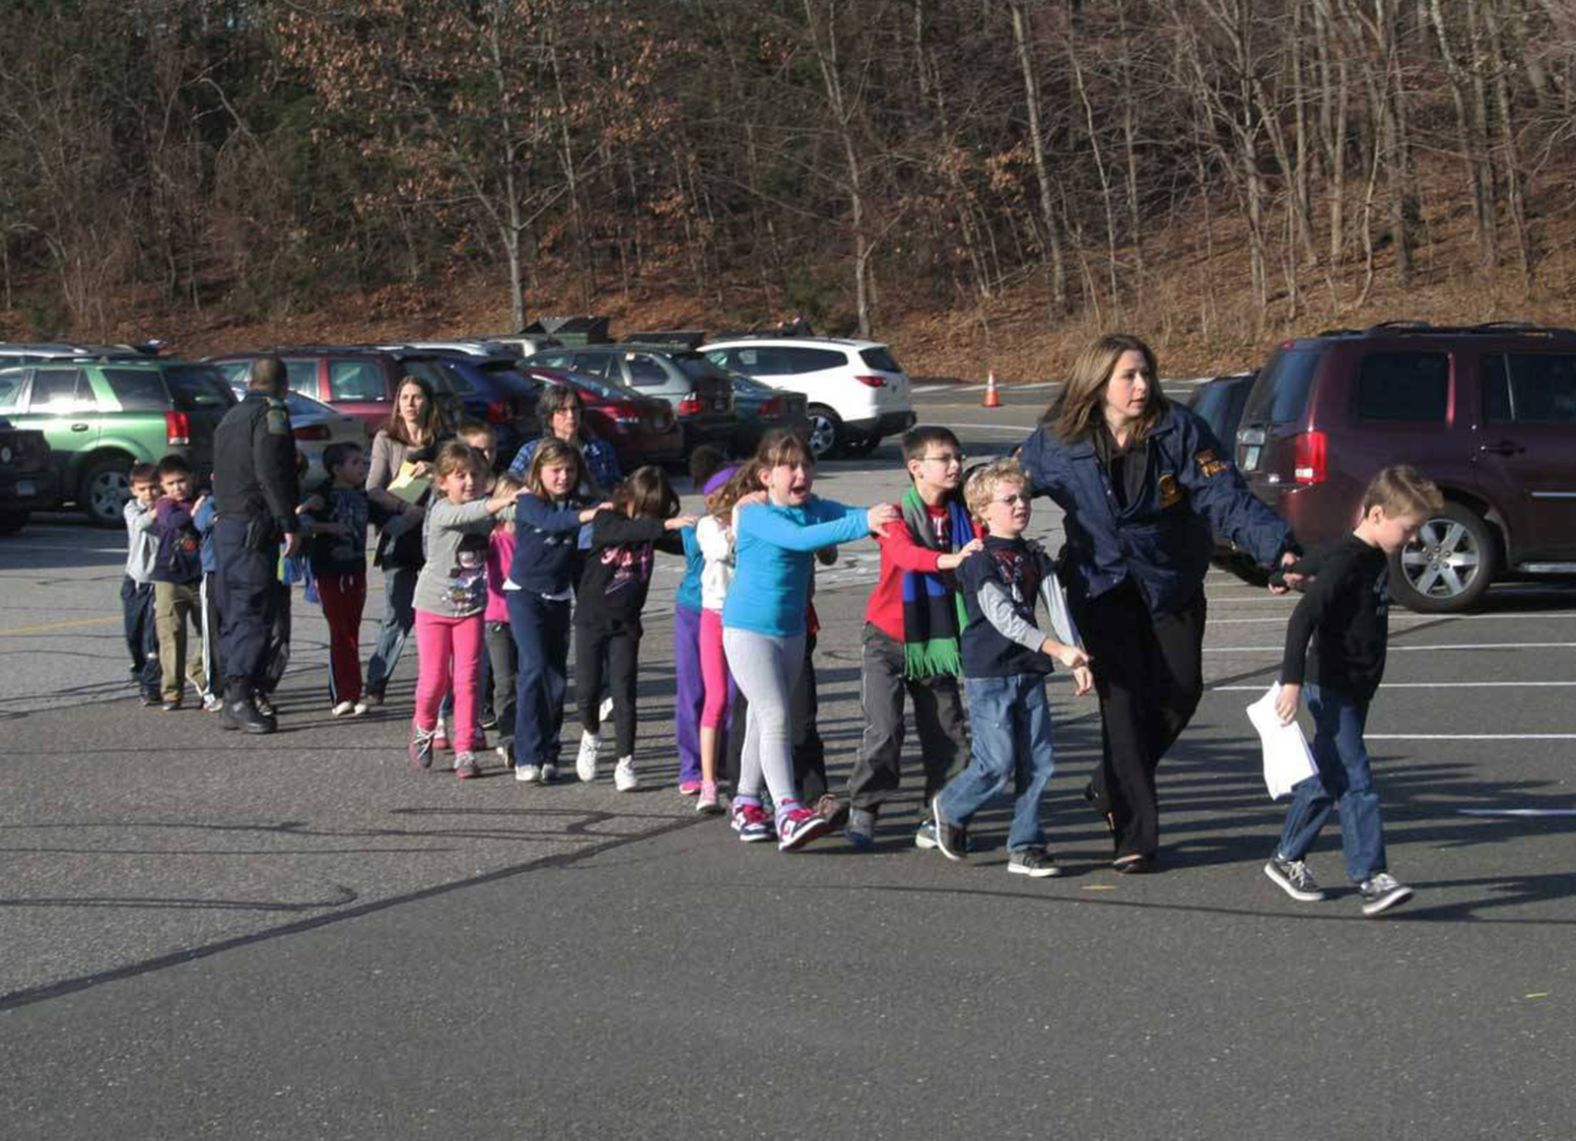 Children are escorted out of Sandy Hook Elementary School after <a href="https://www.cnn.com/2013/06/07/us/connecticut-shootings-fast-facts/index.html" target="_blank">a mass shooting occurred at the school</a> in Newtown, Connecticut, in December 2012. Six adults and 20 children were killed by Adam Lanza, who had earlier killed his mother in their home. The photograph, taken by local journalist Shannon Hicks, made it onto the front pages of newspapers, magazines and websites around the world. "I knew that, coming out of the building — as terrified as they were — those children were safe," Hicks later told Time magazine. "I just felt that it was an important moment."